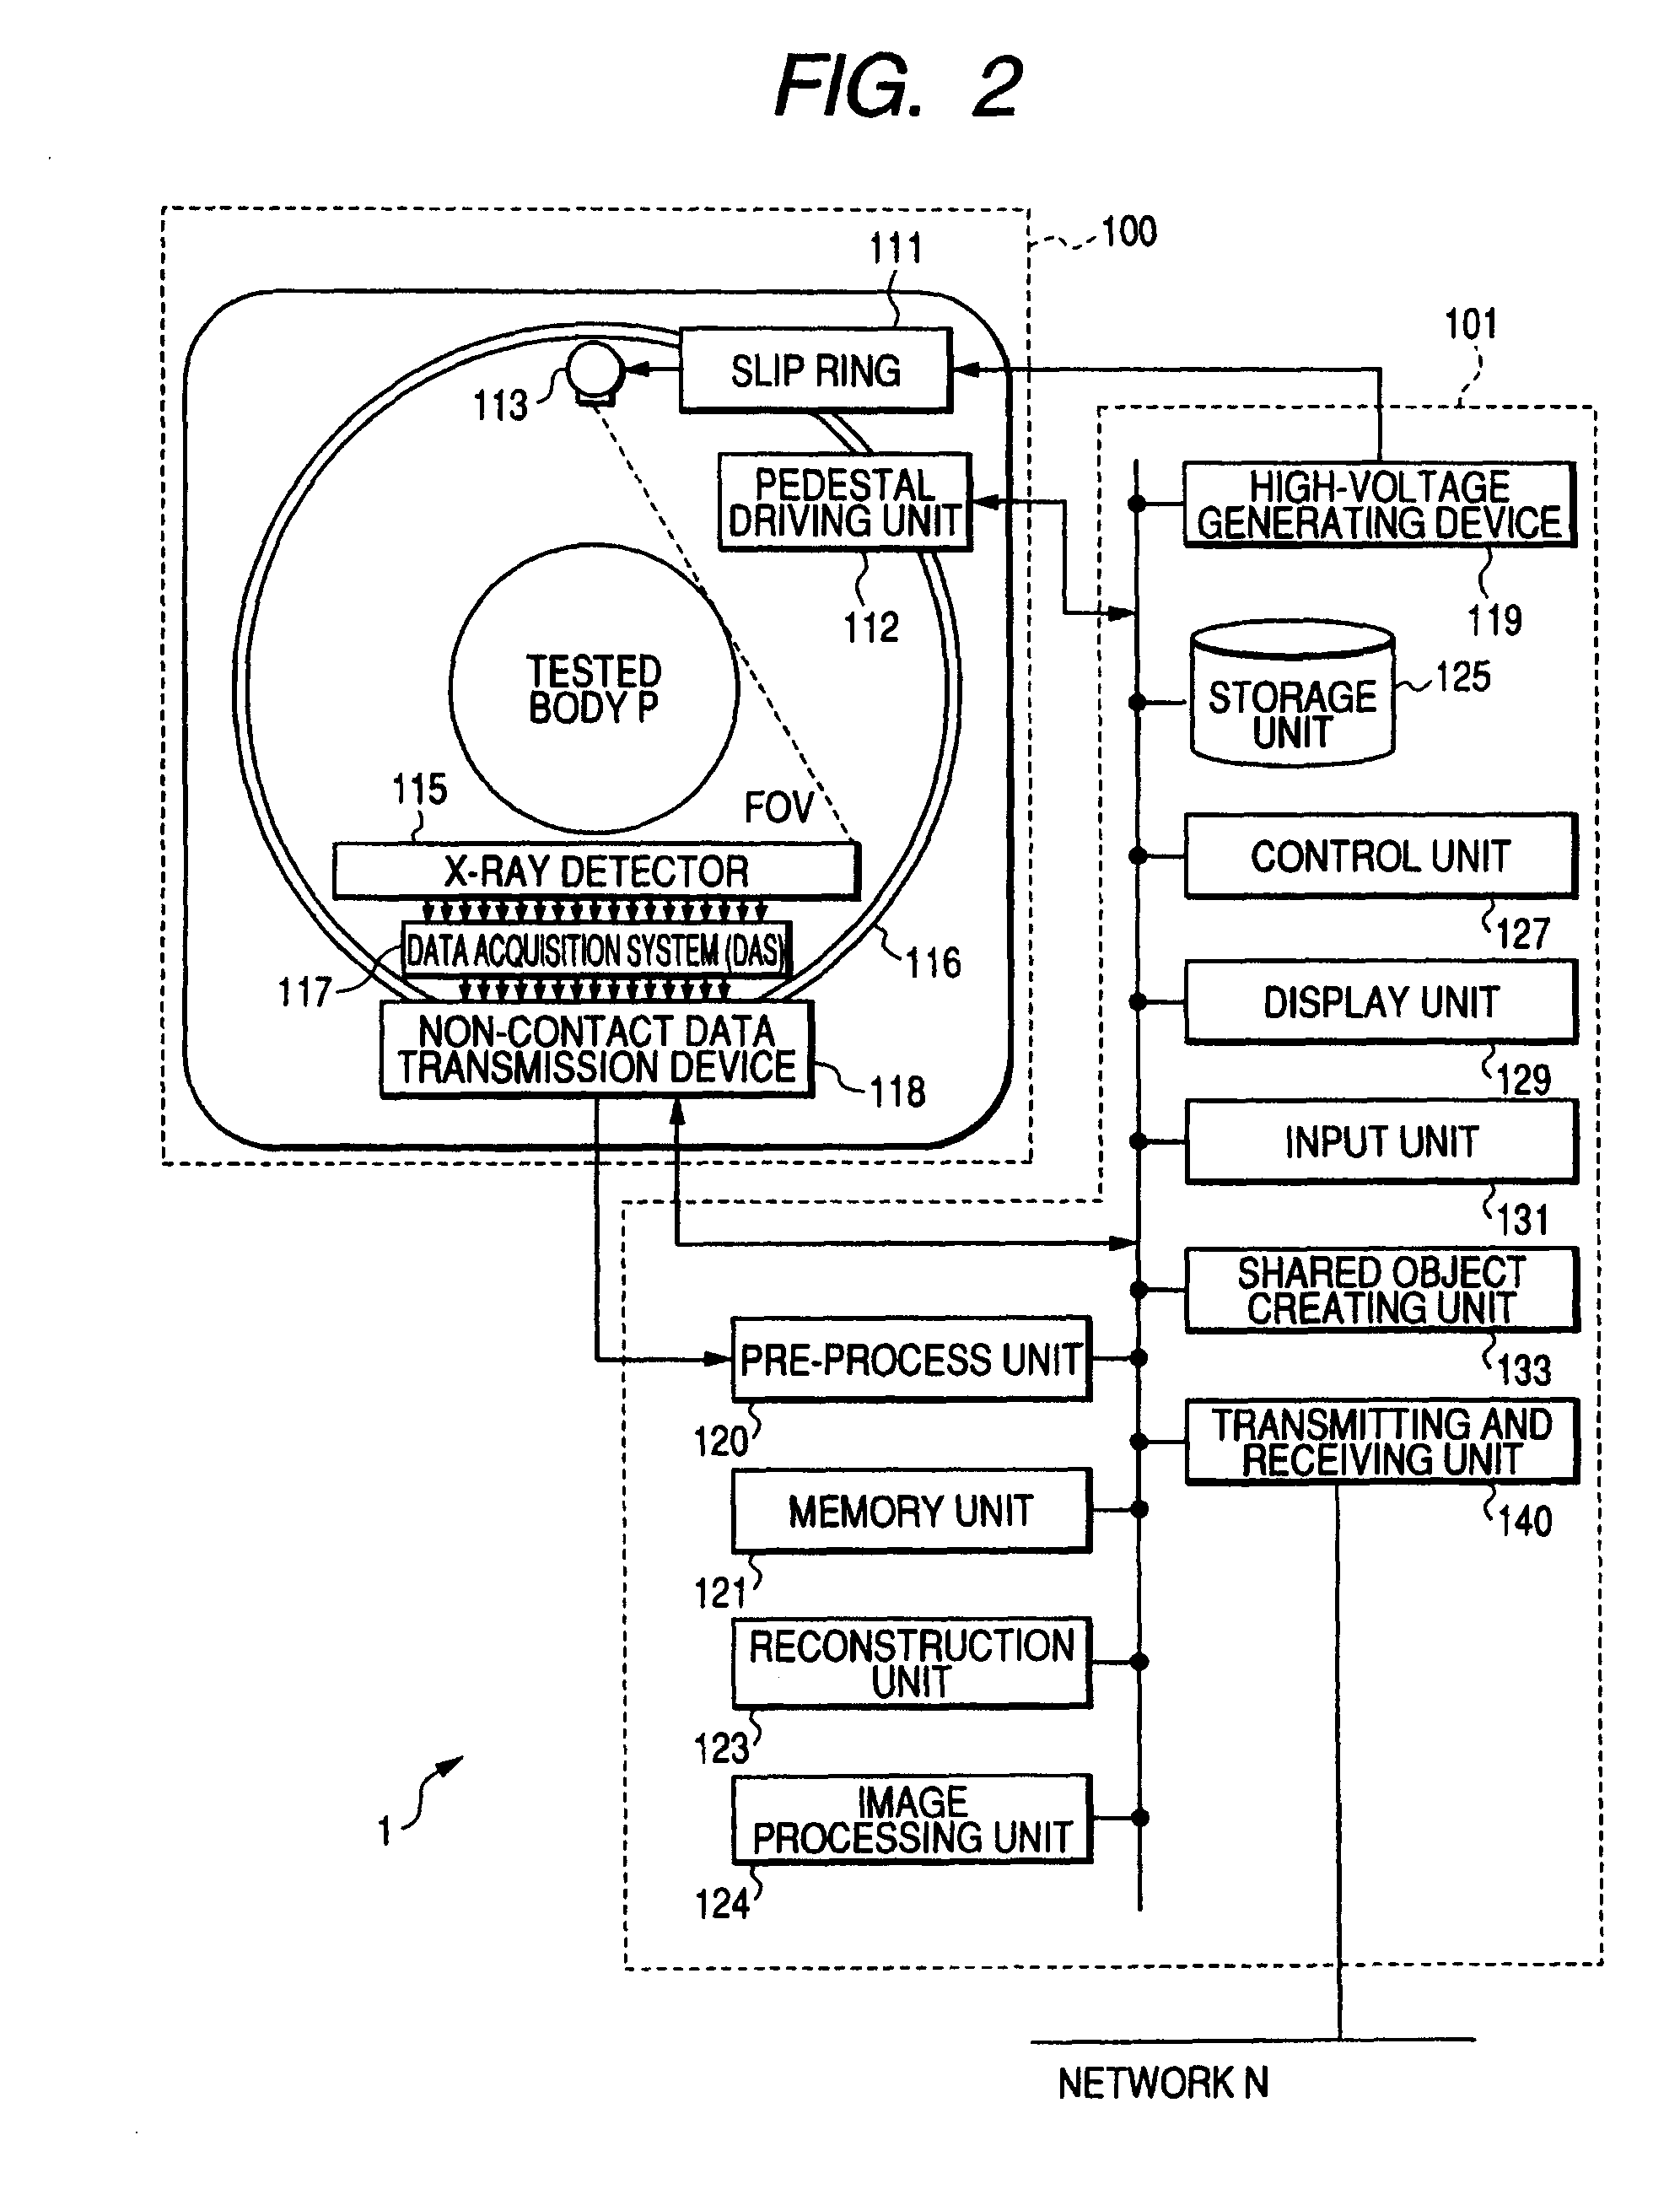 Medical image diagnostic apparatus, picture archiving communication system server, image reference apparatus, and medical image diagnostic system